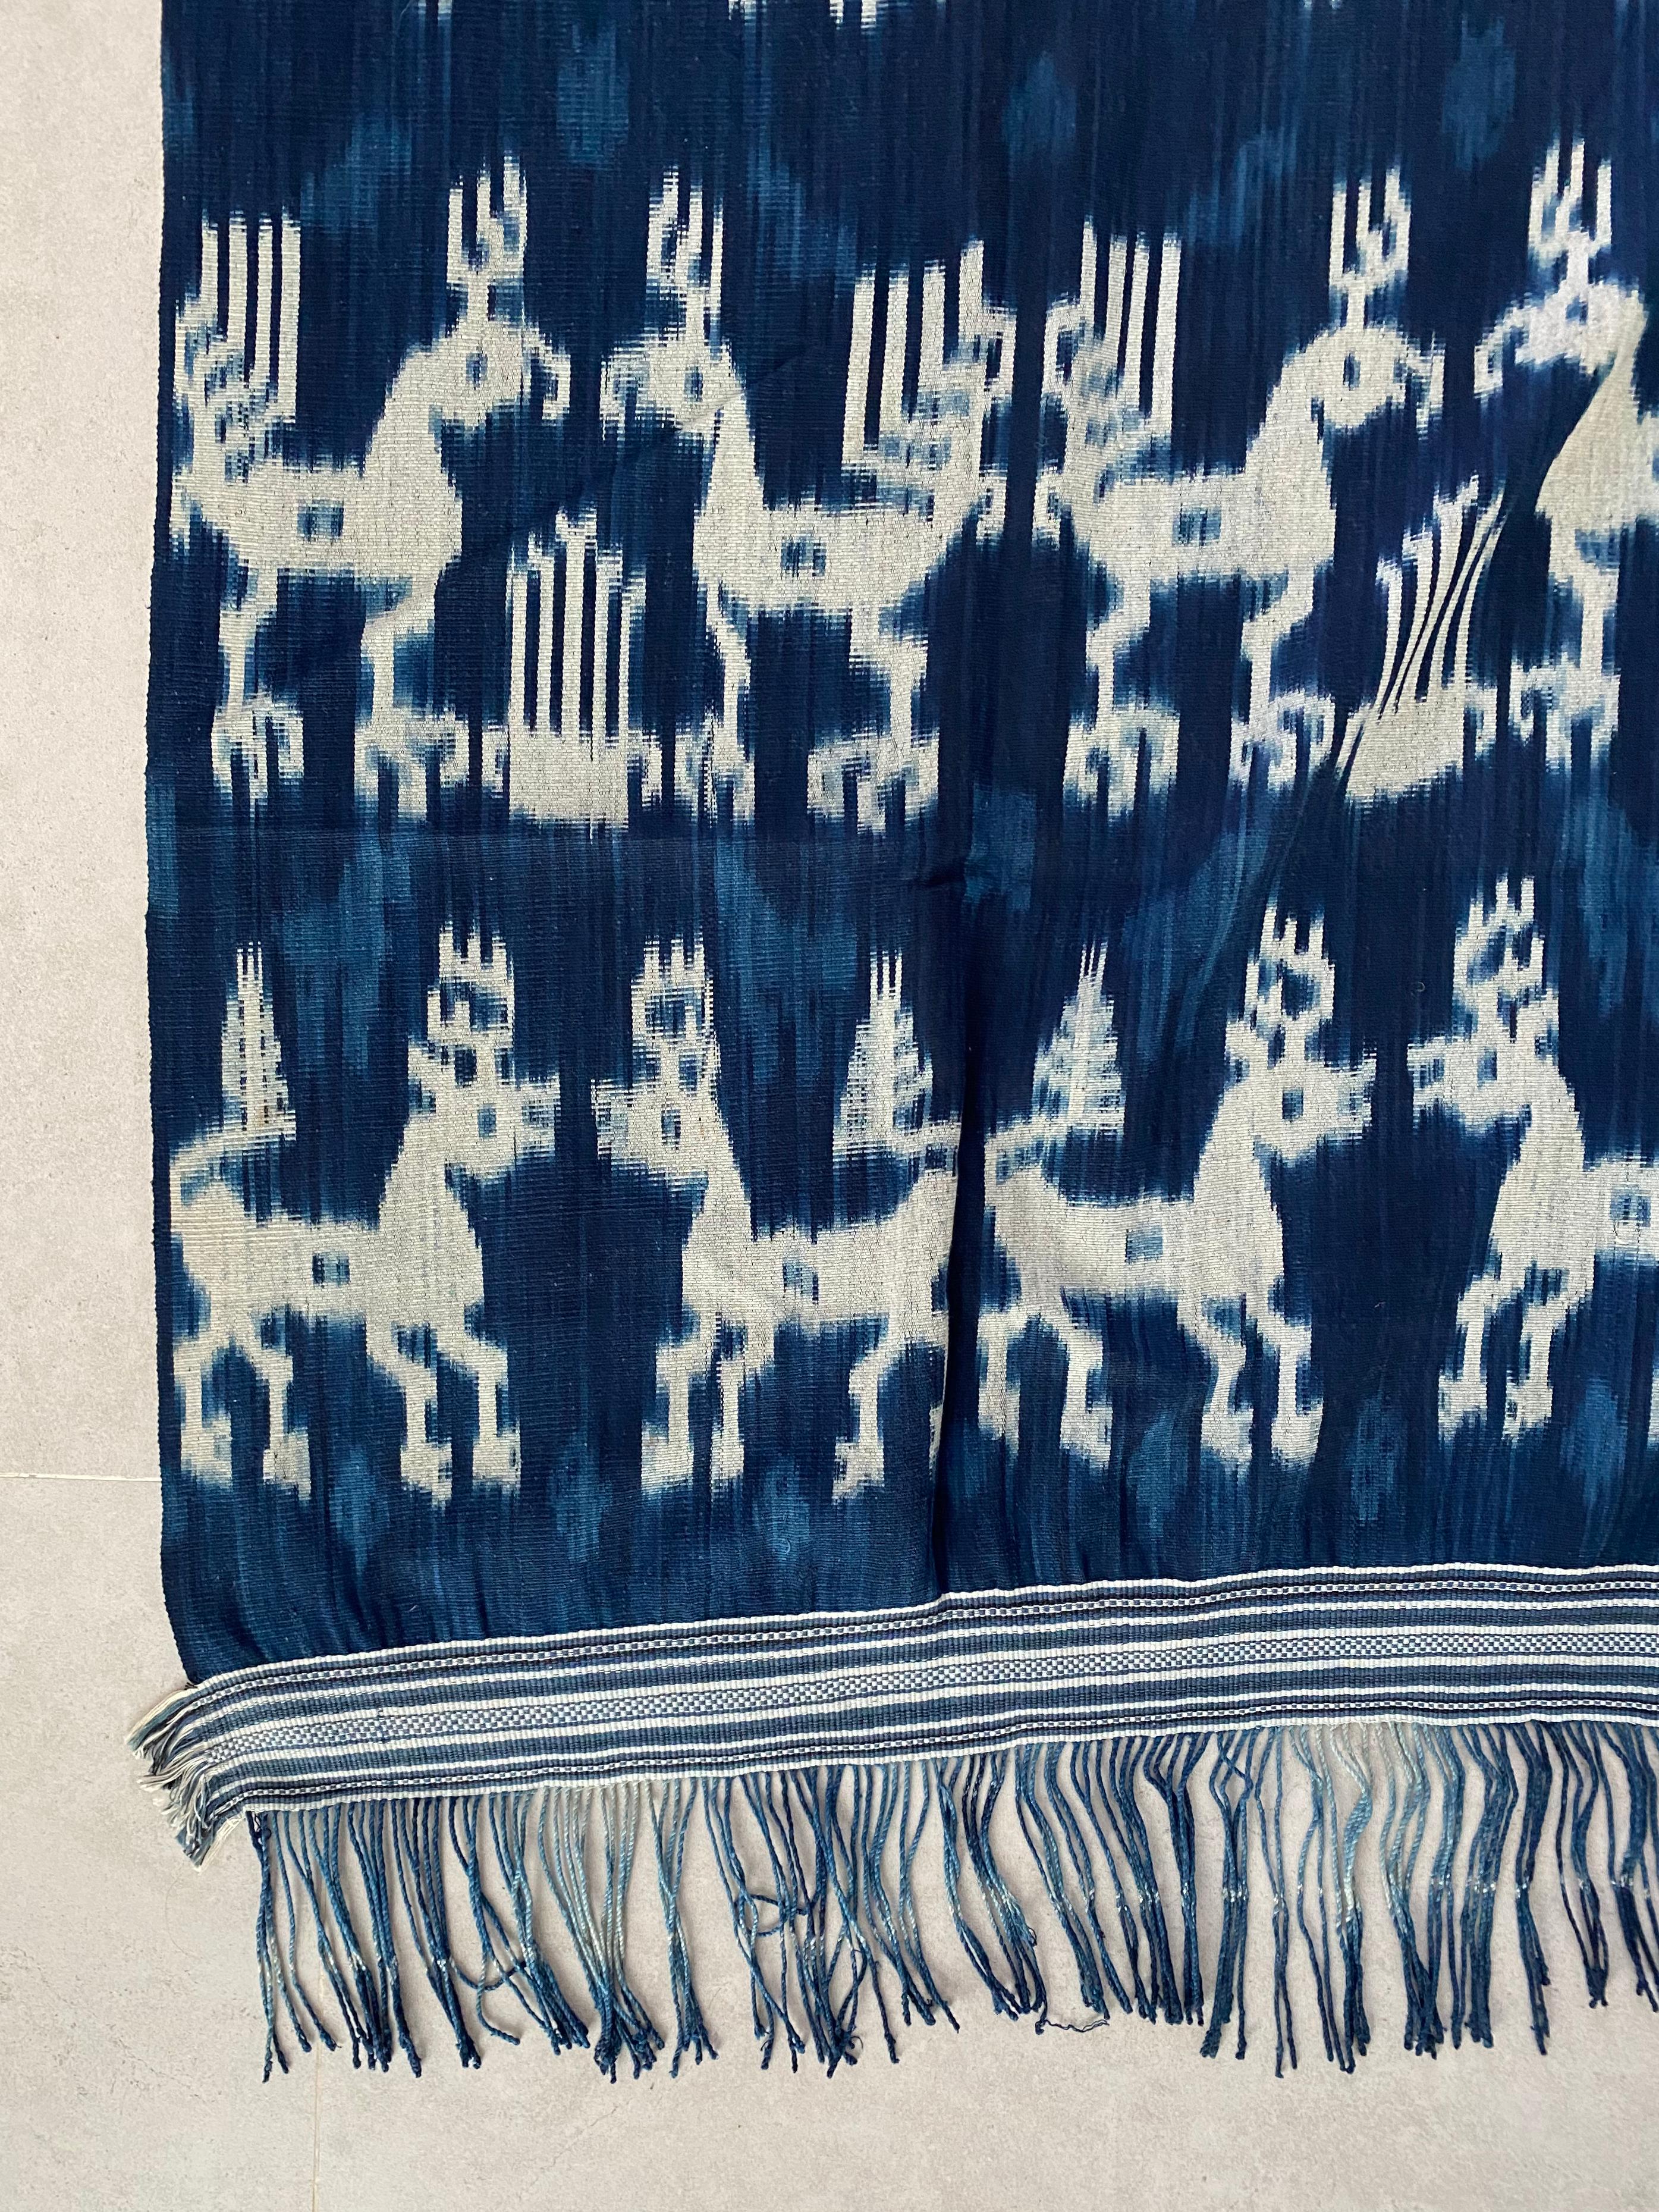 20th Century Ikat Textile from Sumba Island, Indonesia